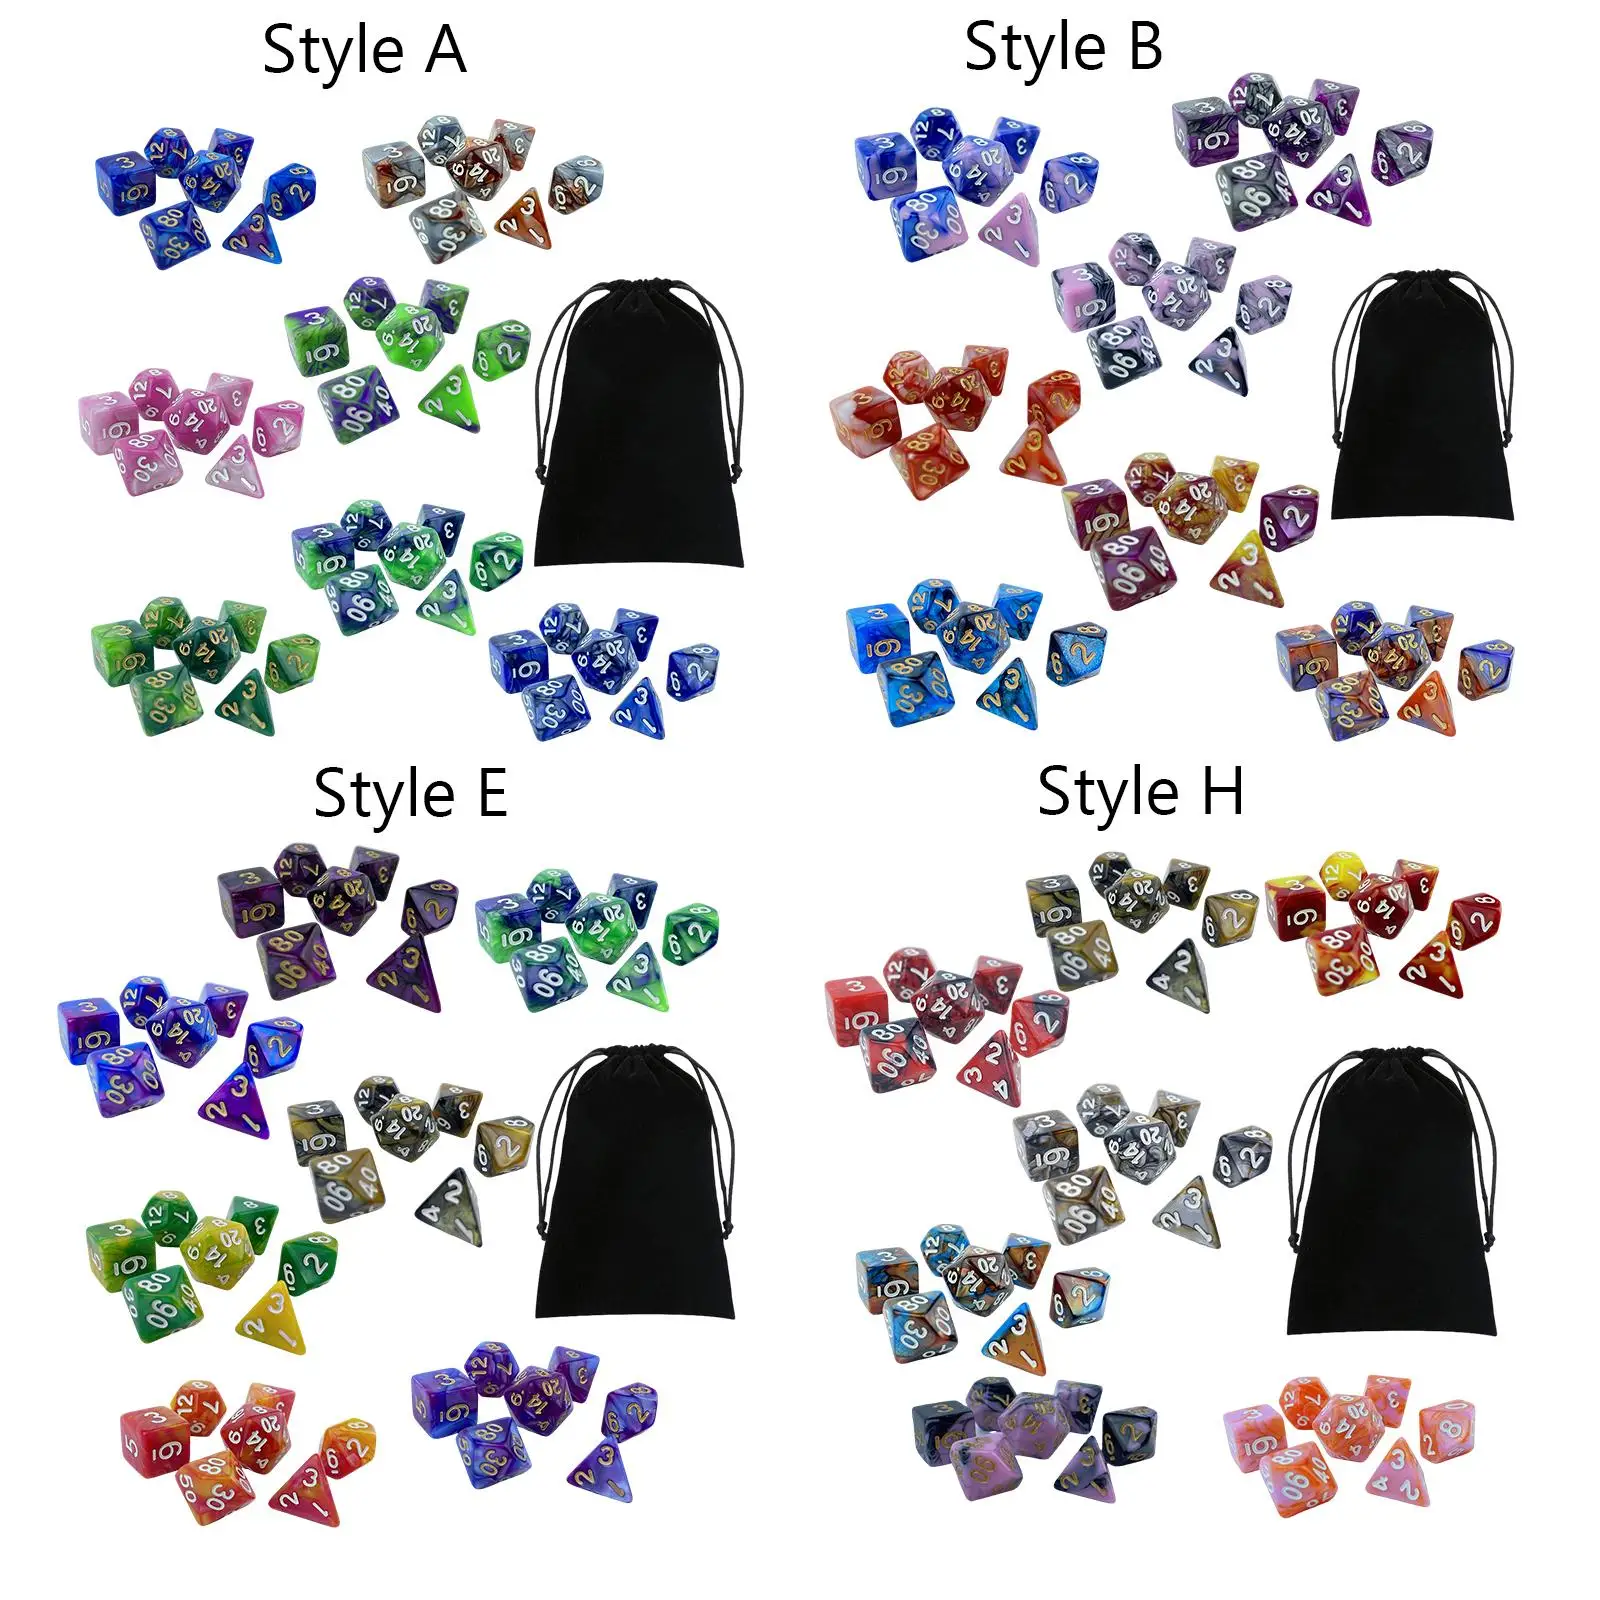 49Pcs Polyhedral Dices Set Rolling Dices for Parties KTV Table Games Roll Playing Games